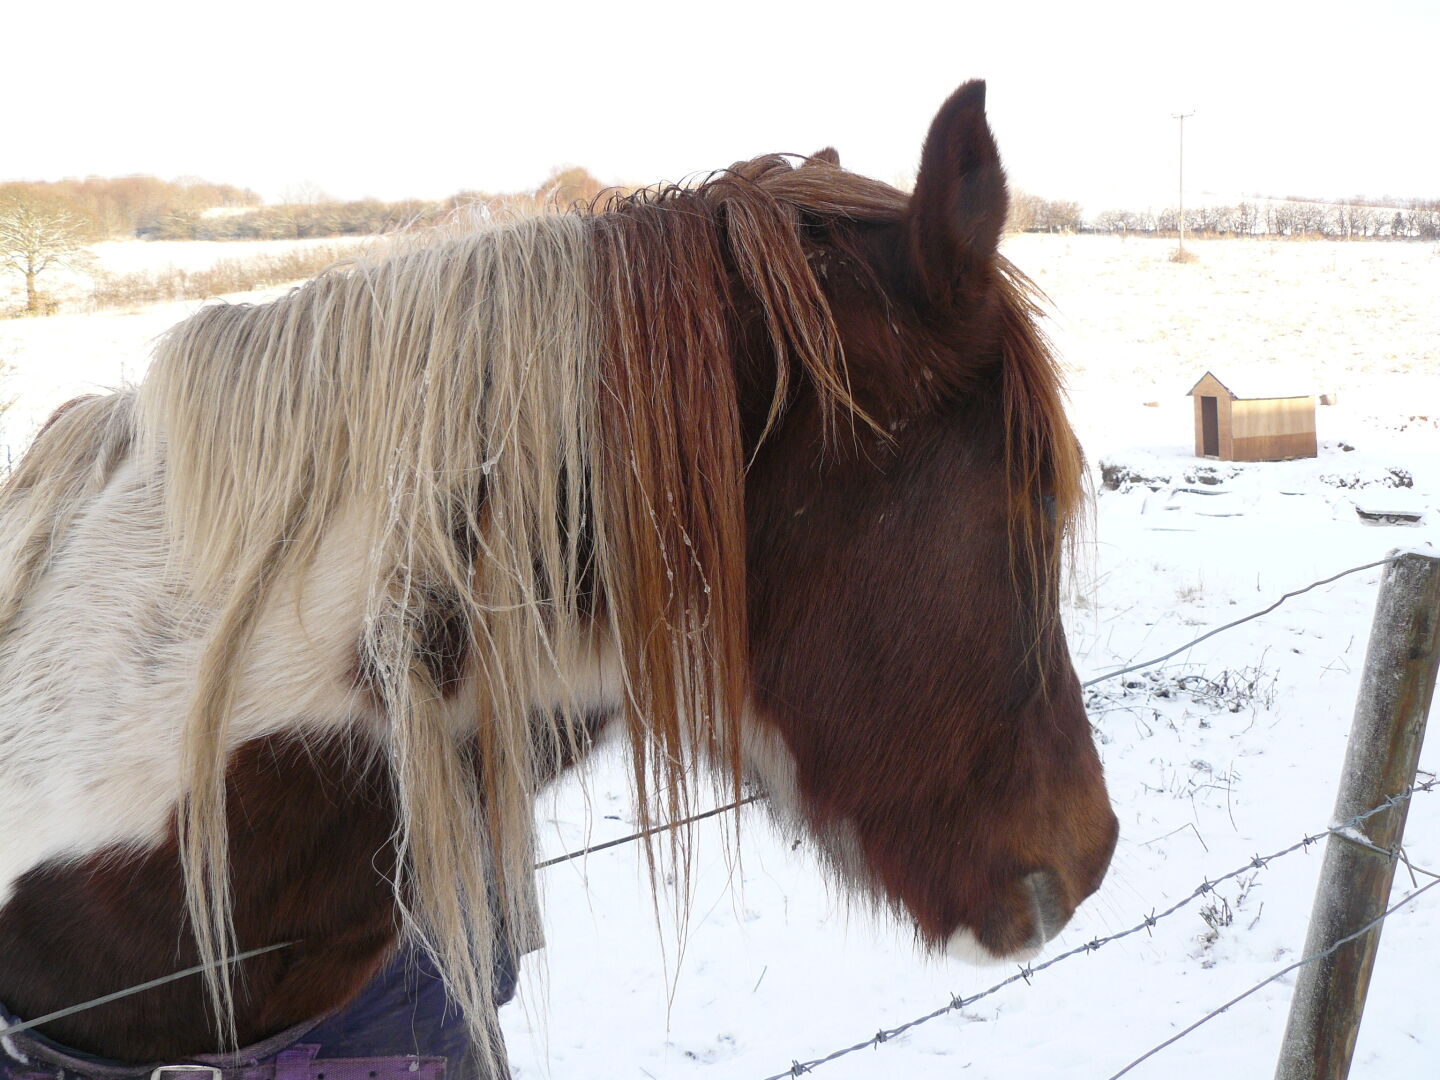 With ice in it&rsquo;s mane, the horse has withstood all the snow so far.